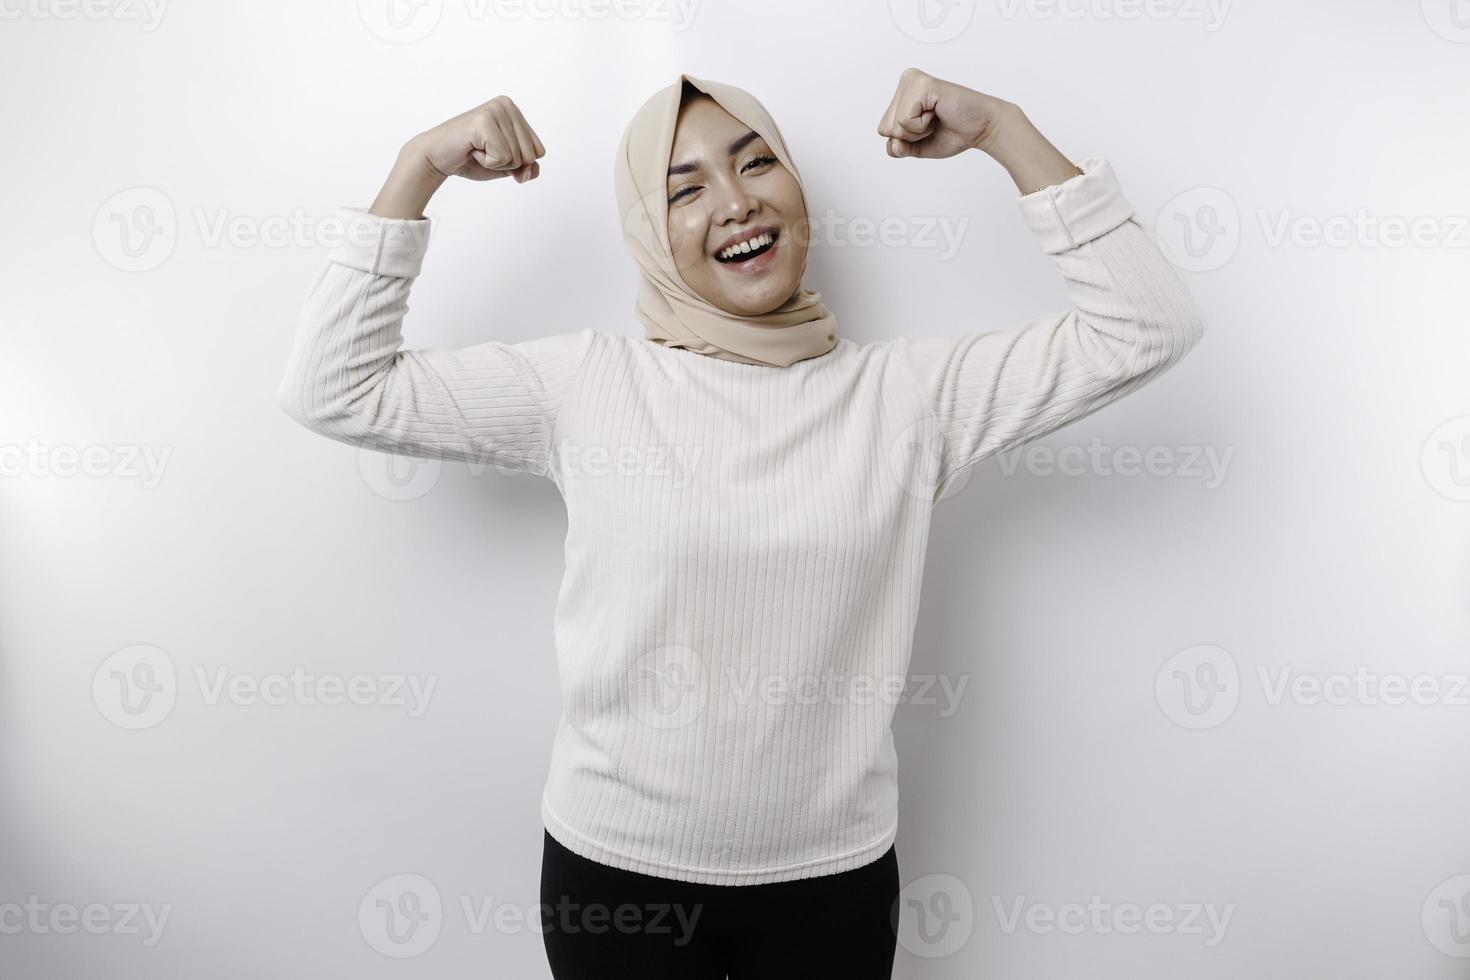 Excited Asian Muslim woman wearing a headscarf showing strong gesture by lifting her arms and muscles smiling proudly photo